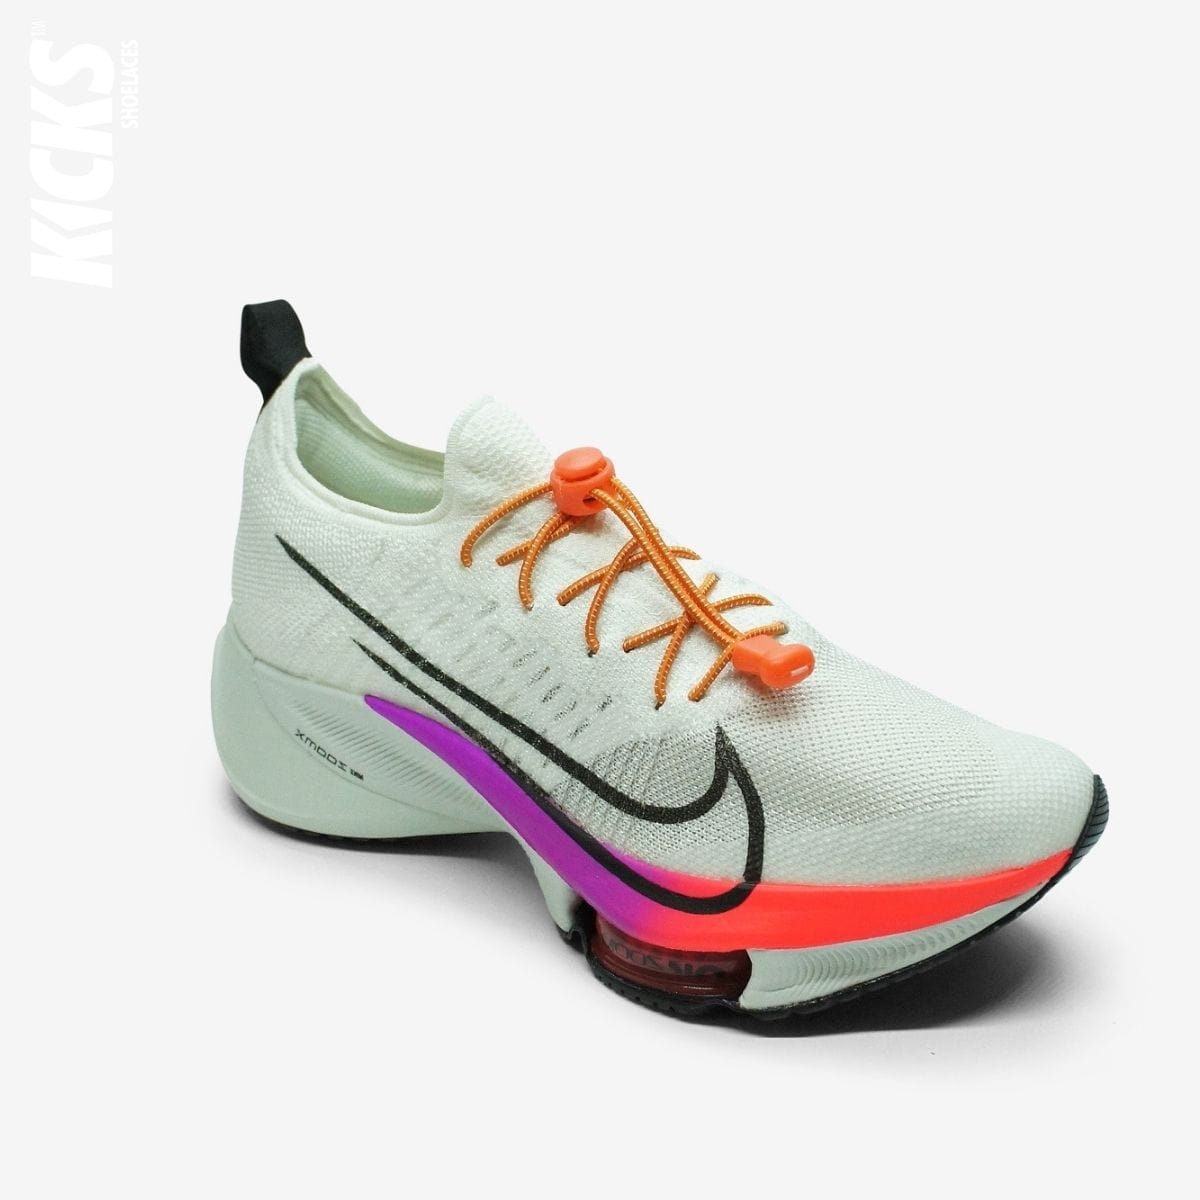 quick-laces-with-orange-elastic-no-tie-shoelaces-on-nike-running-shoe-by-kicks-shoelaces